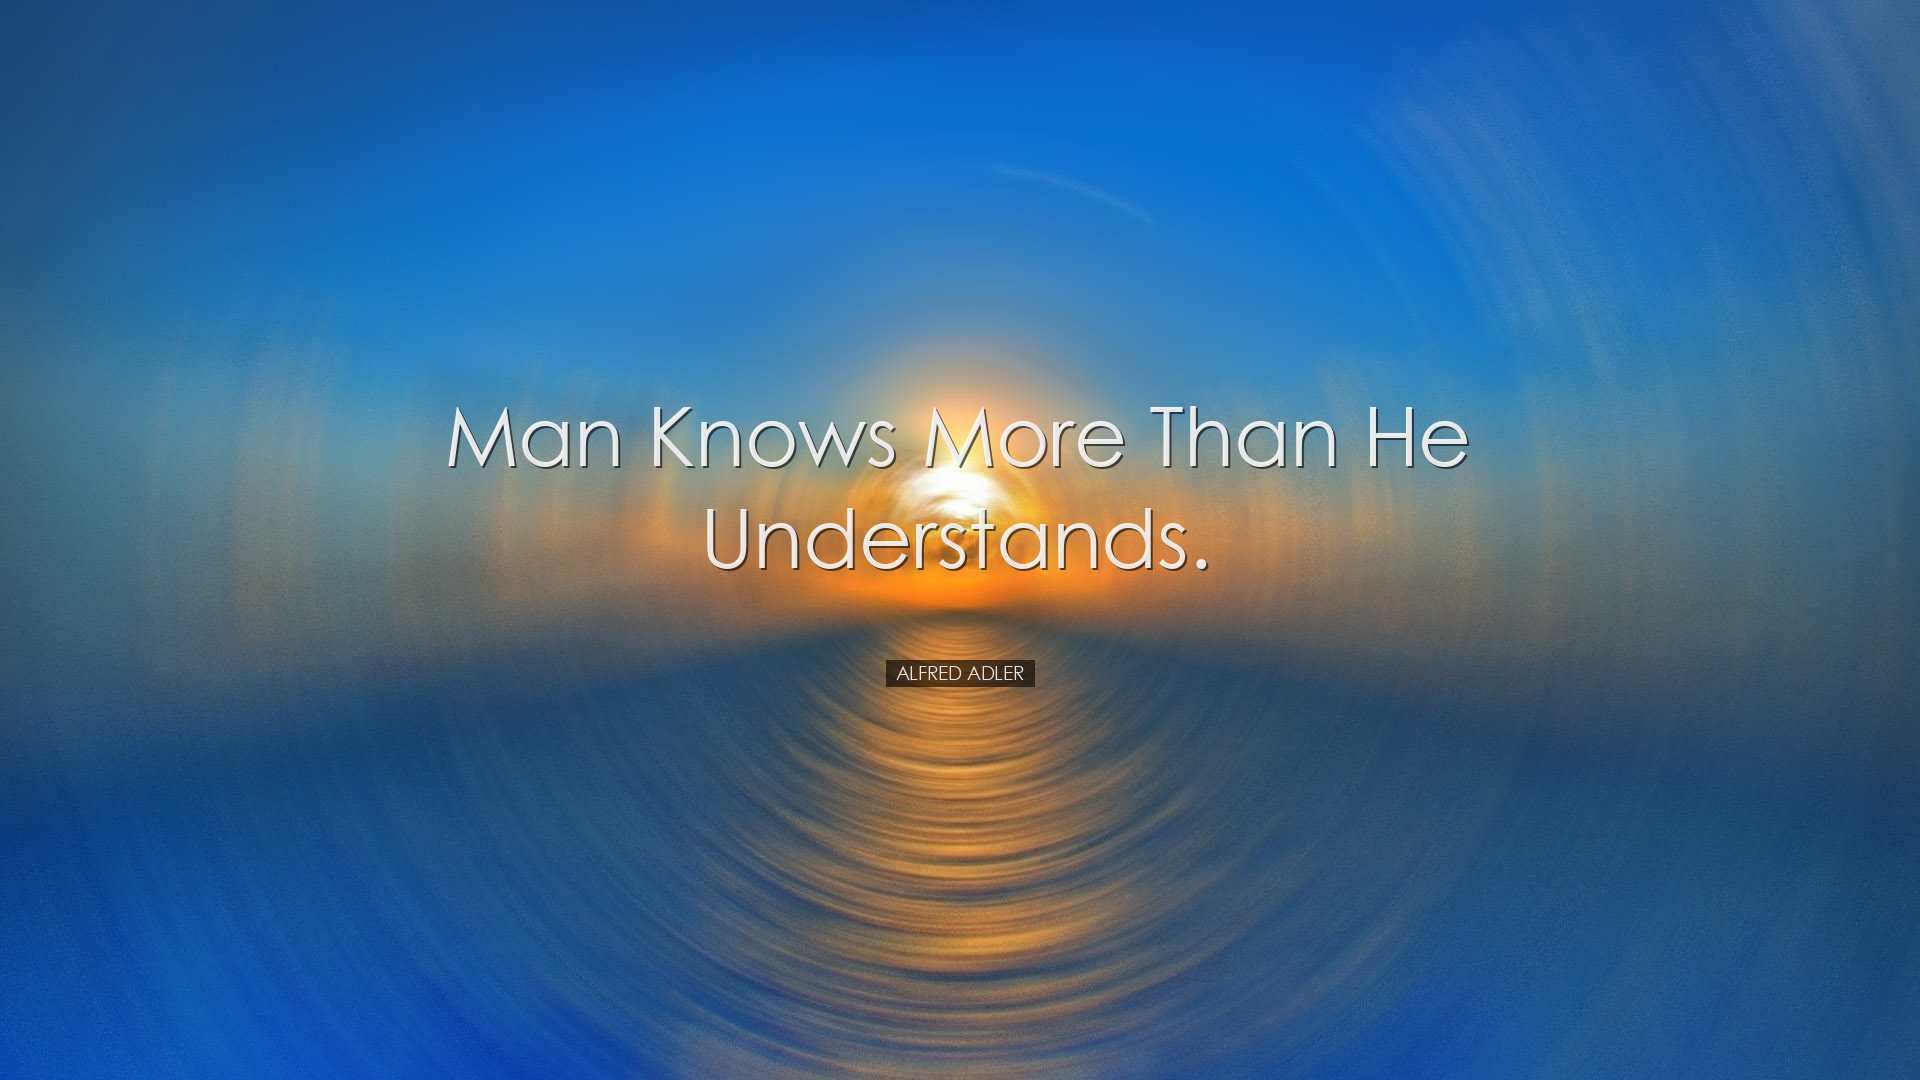 Man knows more than he understands. - Alfred Adler